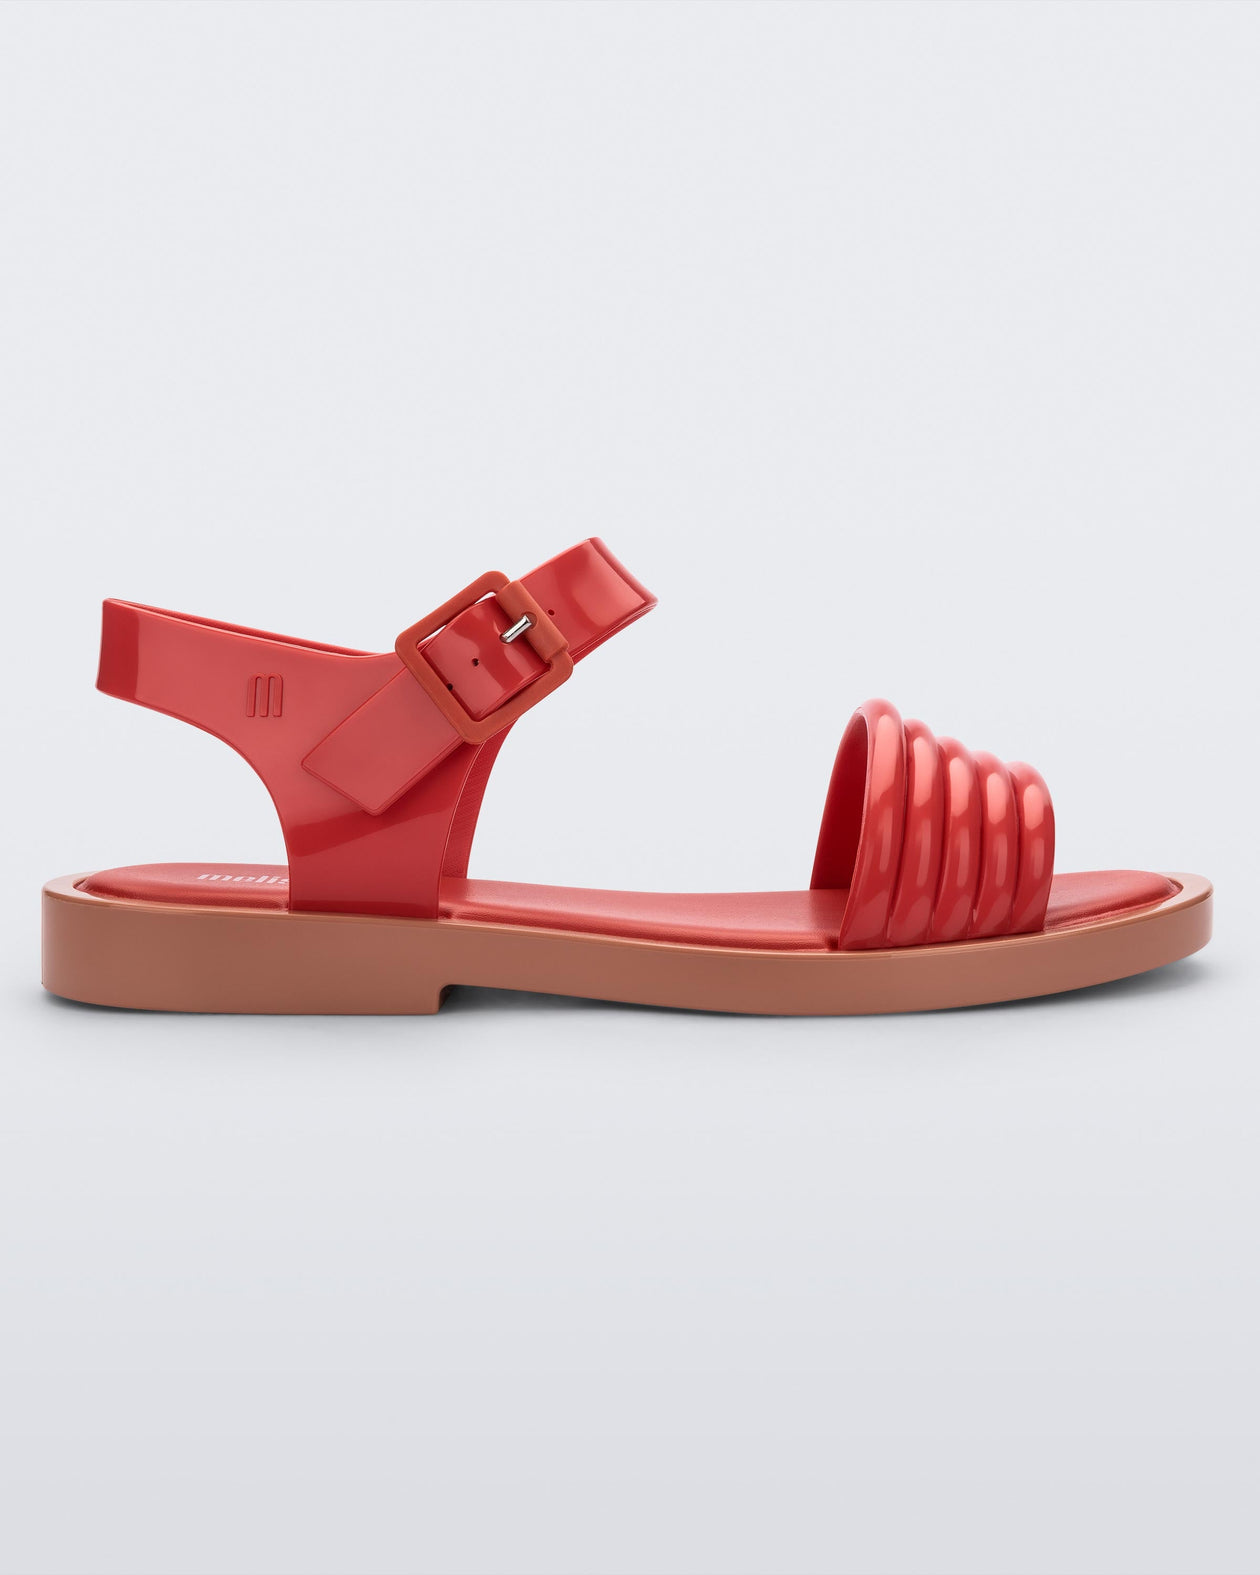 Side view of a red Mar Wave women's sandal with beige sole.